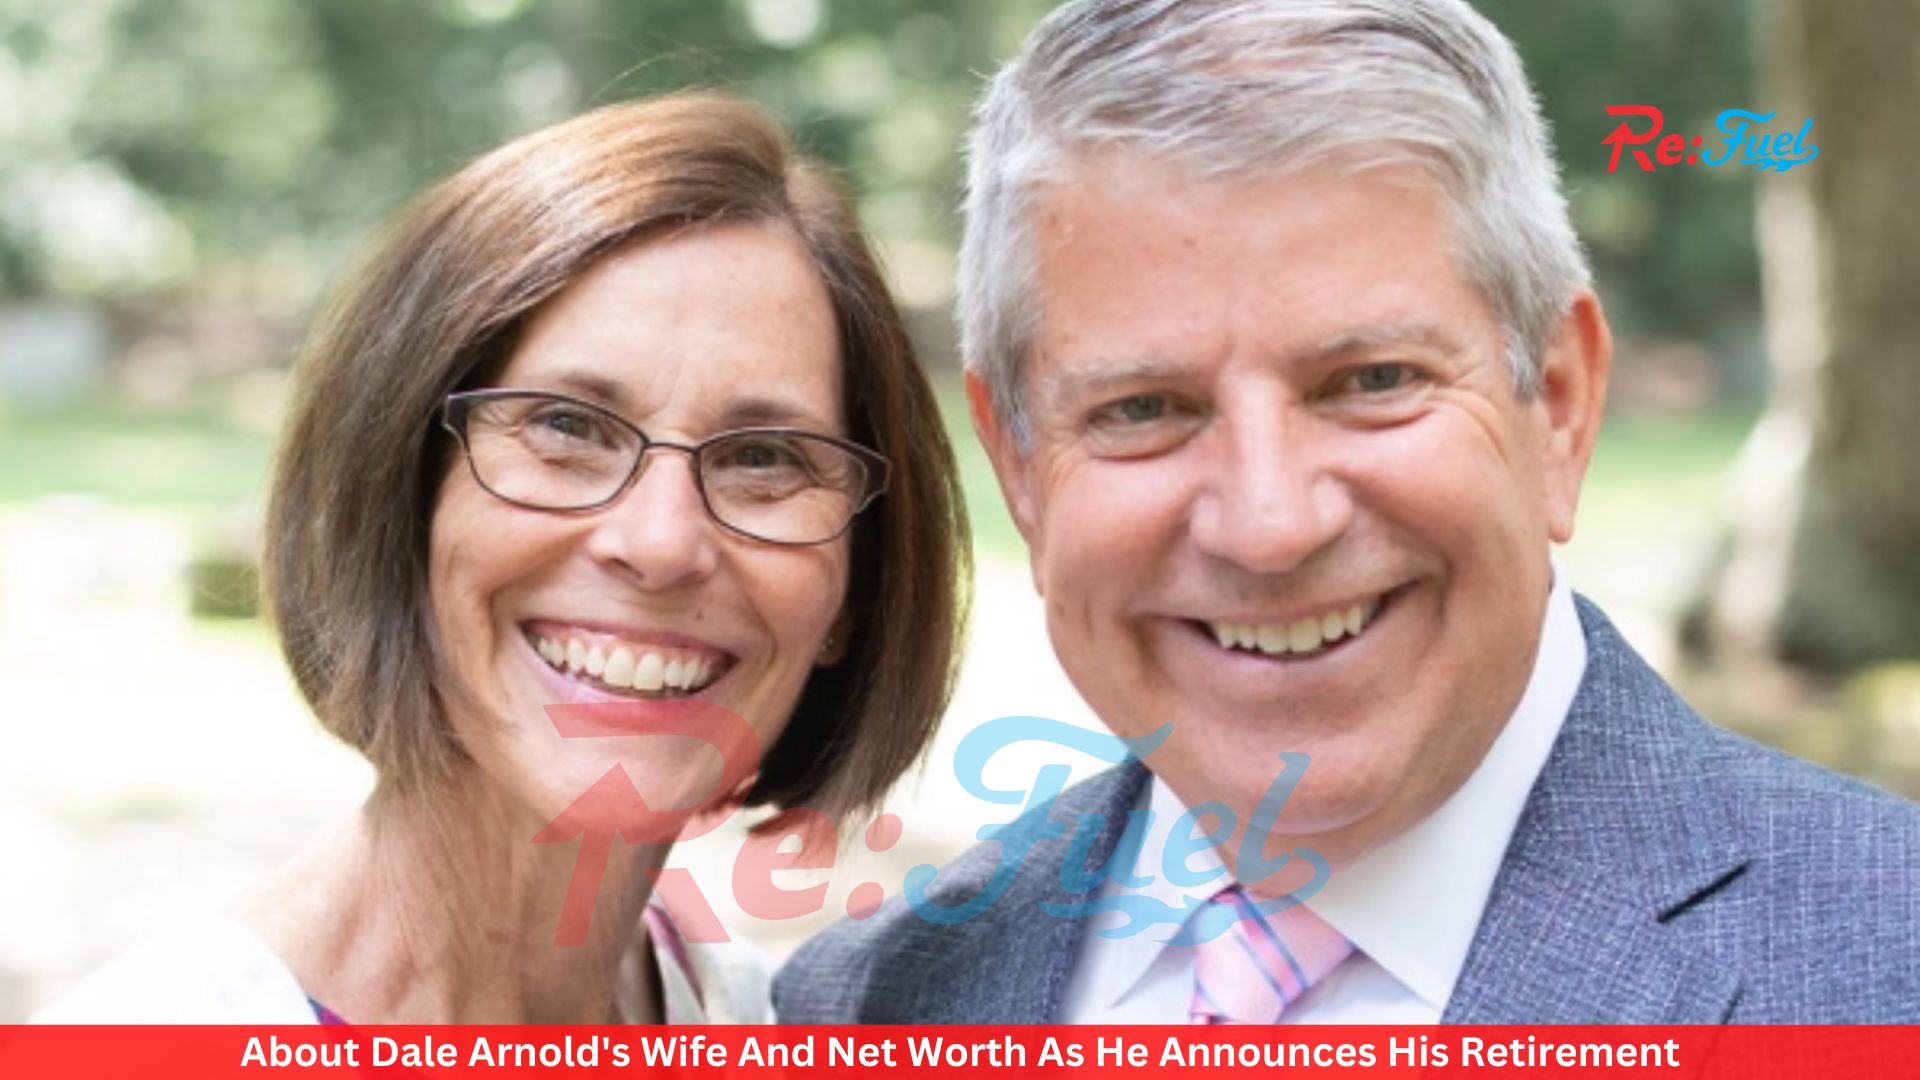 About Dale Arnold's Wife And Net Worth As He Announces His Retirement